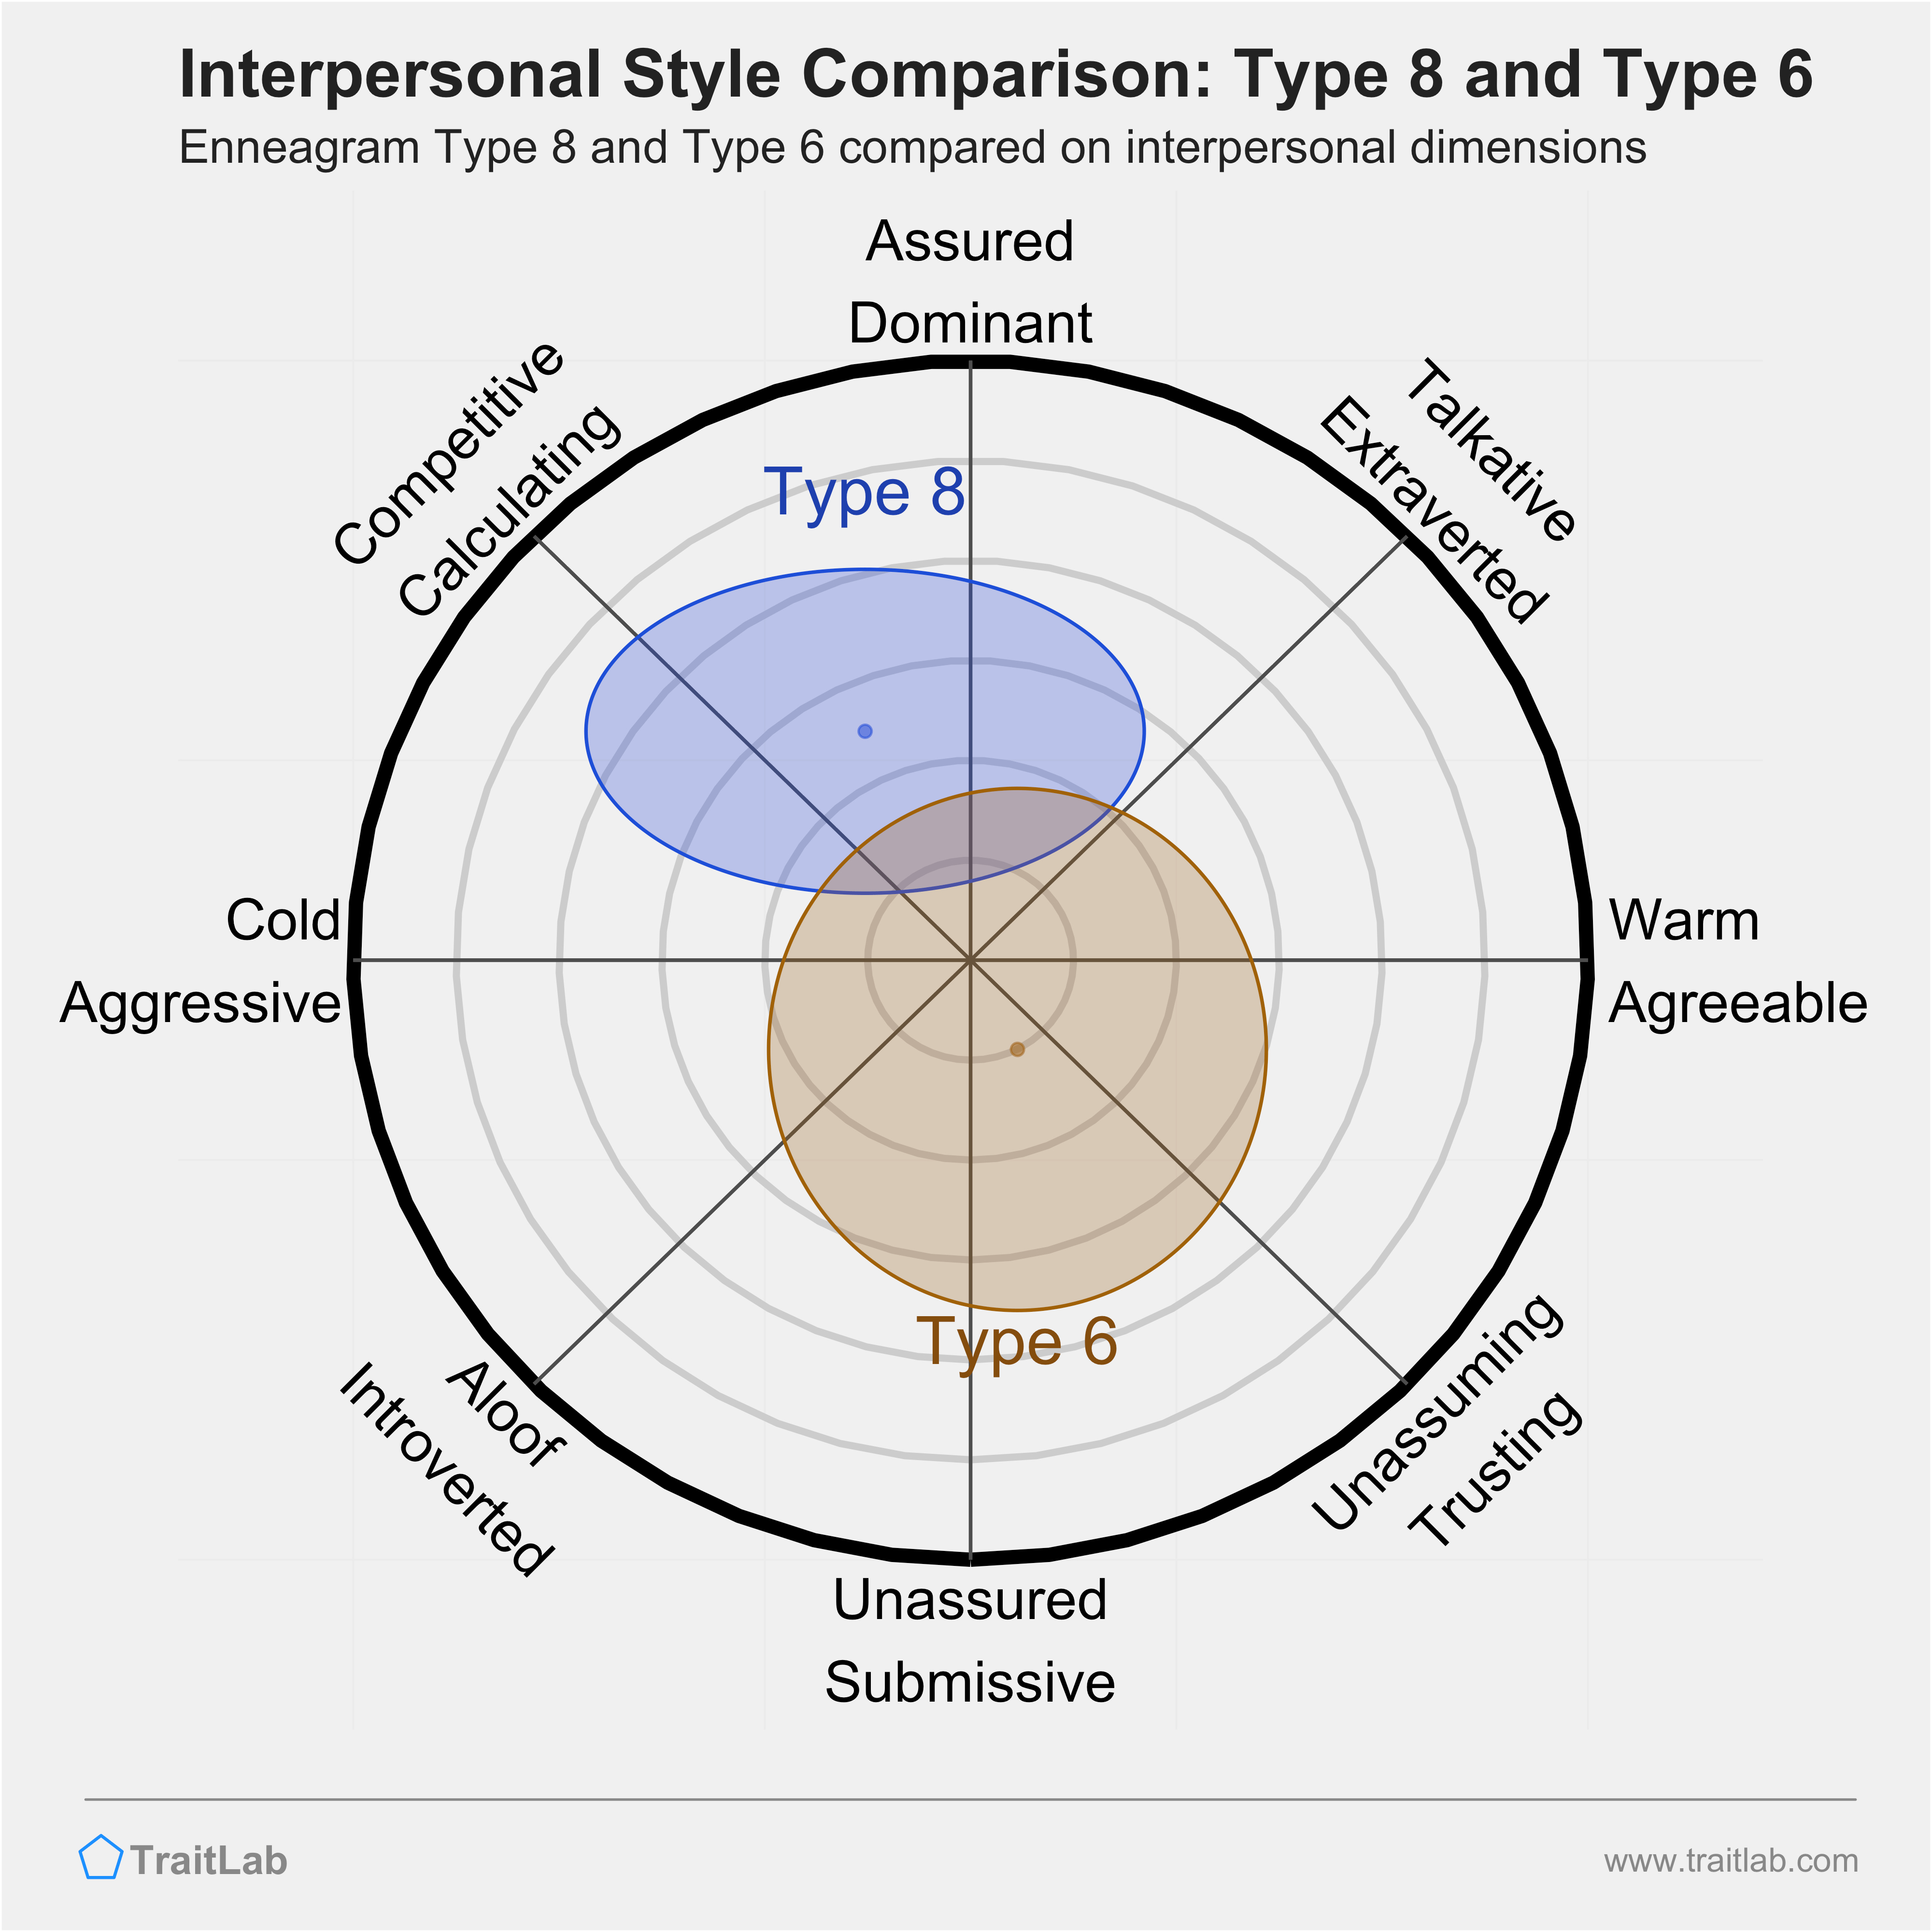 Enneagram Type 8 and Type 6 comparison across interpersonal dimensions